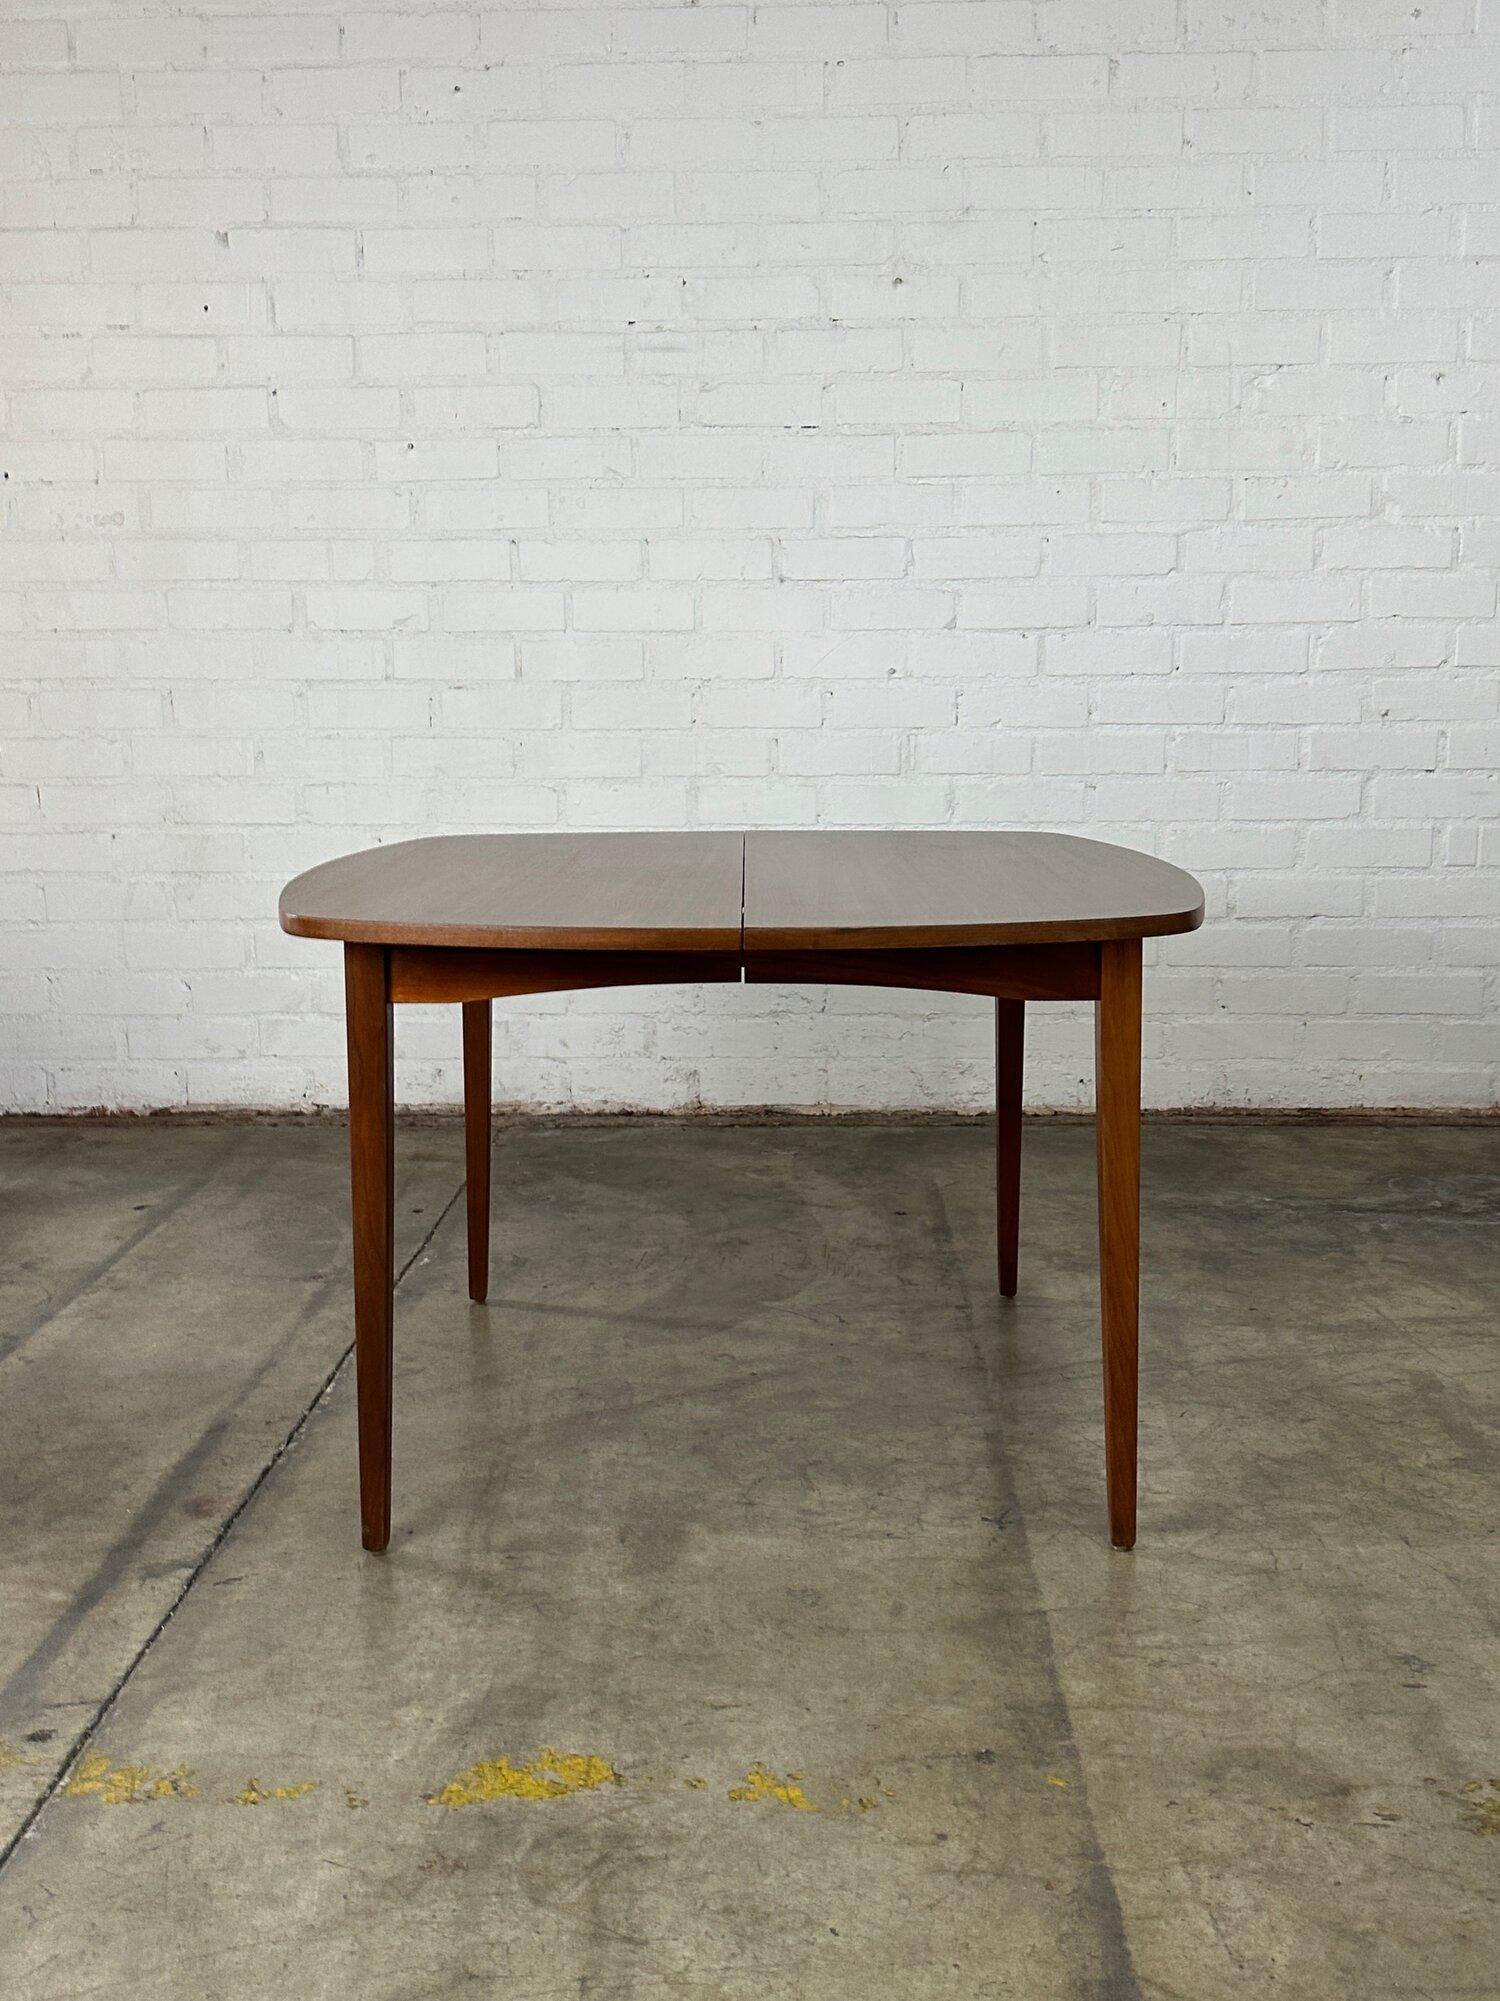 W43.5 W67 D44 H28.5 Knee Clearance 27.5 Leaf W23.5

Fully restored and structurally sound walnut dining table circa 1960s. Item shows in excellent condition with no visible chips , cracks or scratches. Table comes with one extension. 